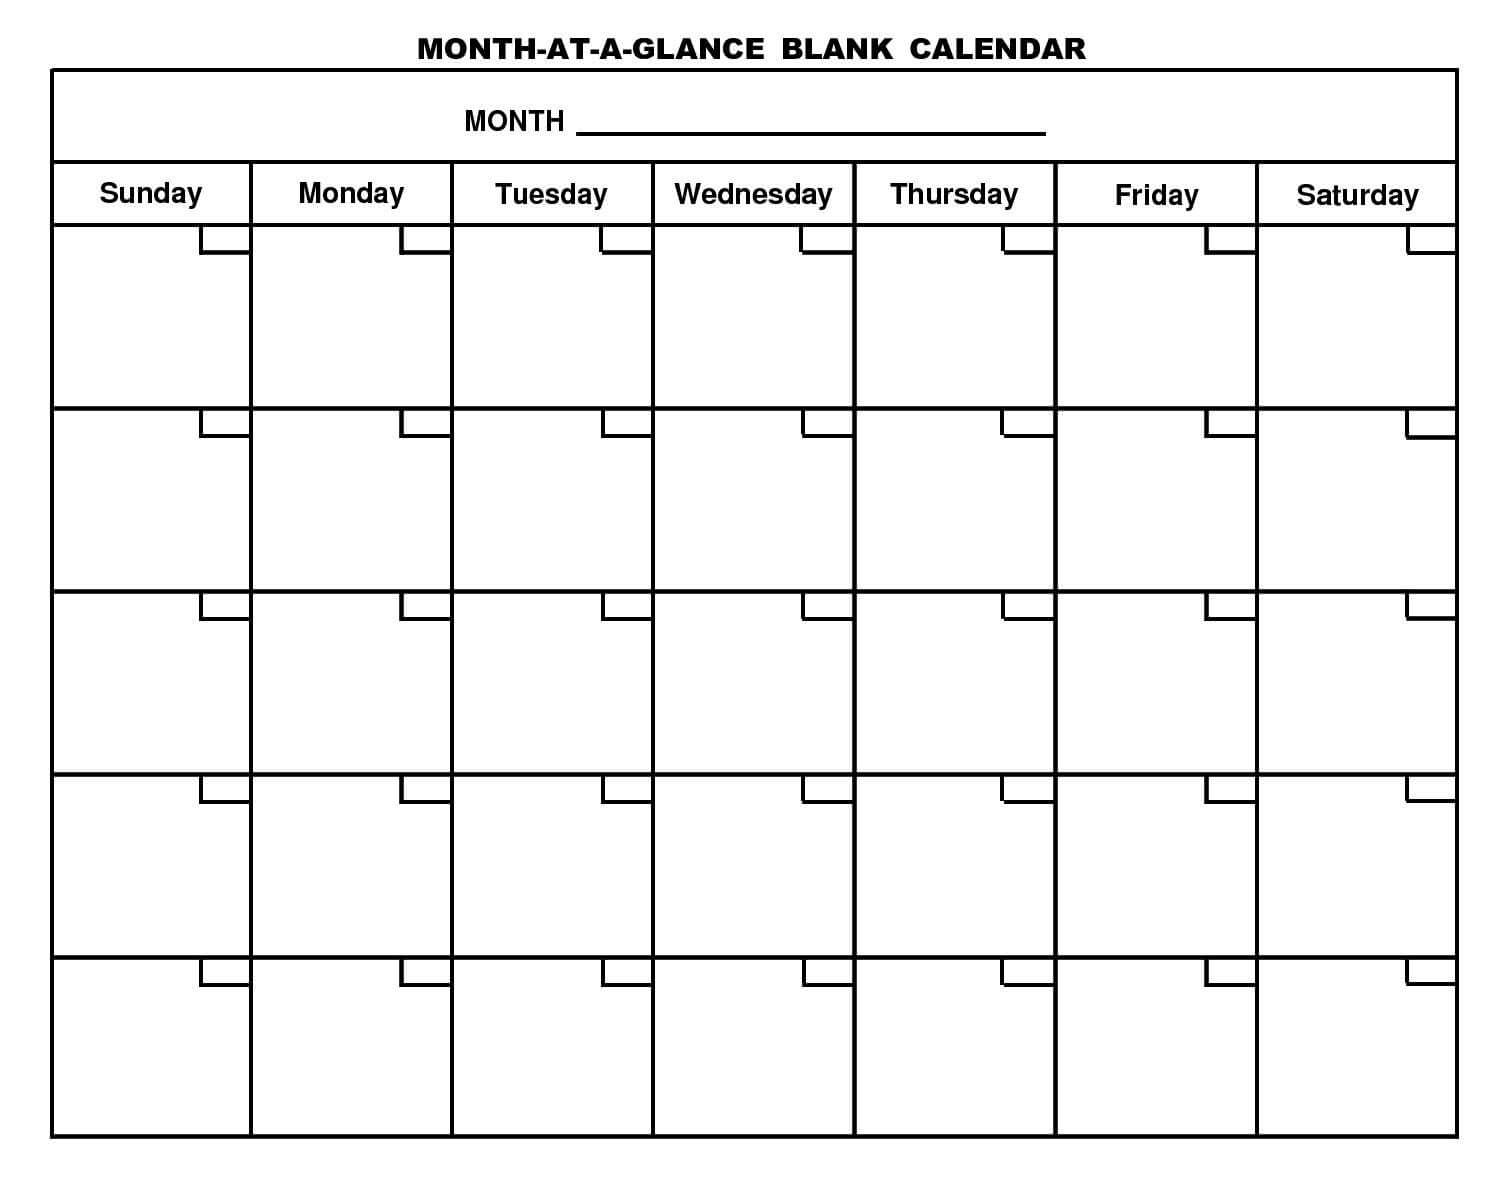 Free Printable Monthly Calendar With Large Boxes Skymaps Throughout Month At A Glance Blank Calendar Template